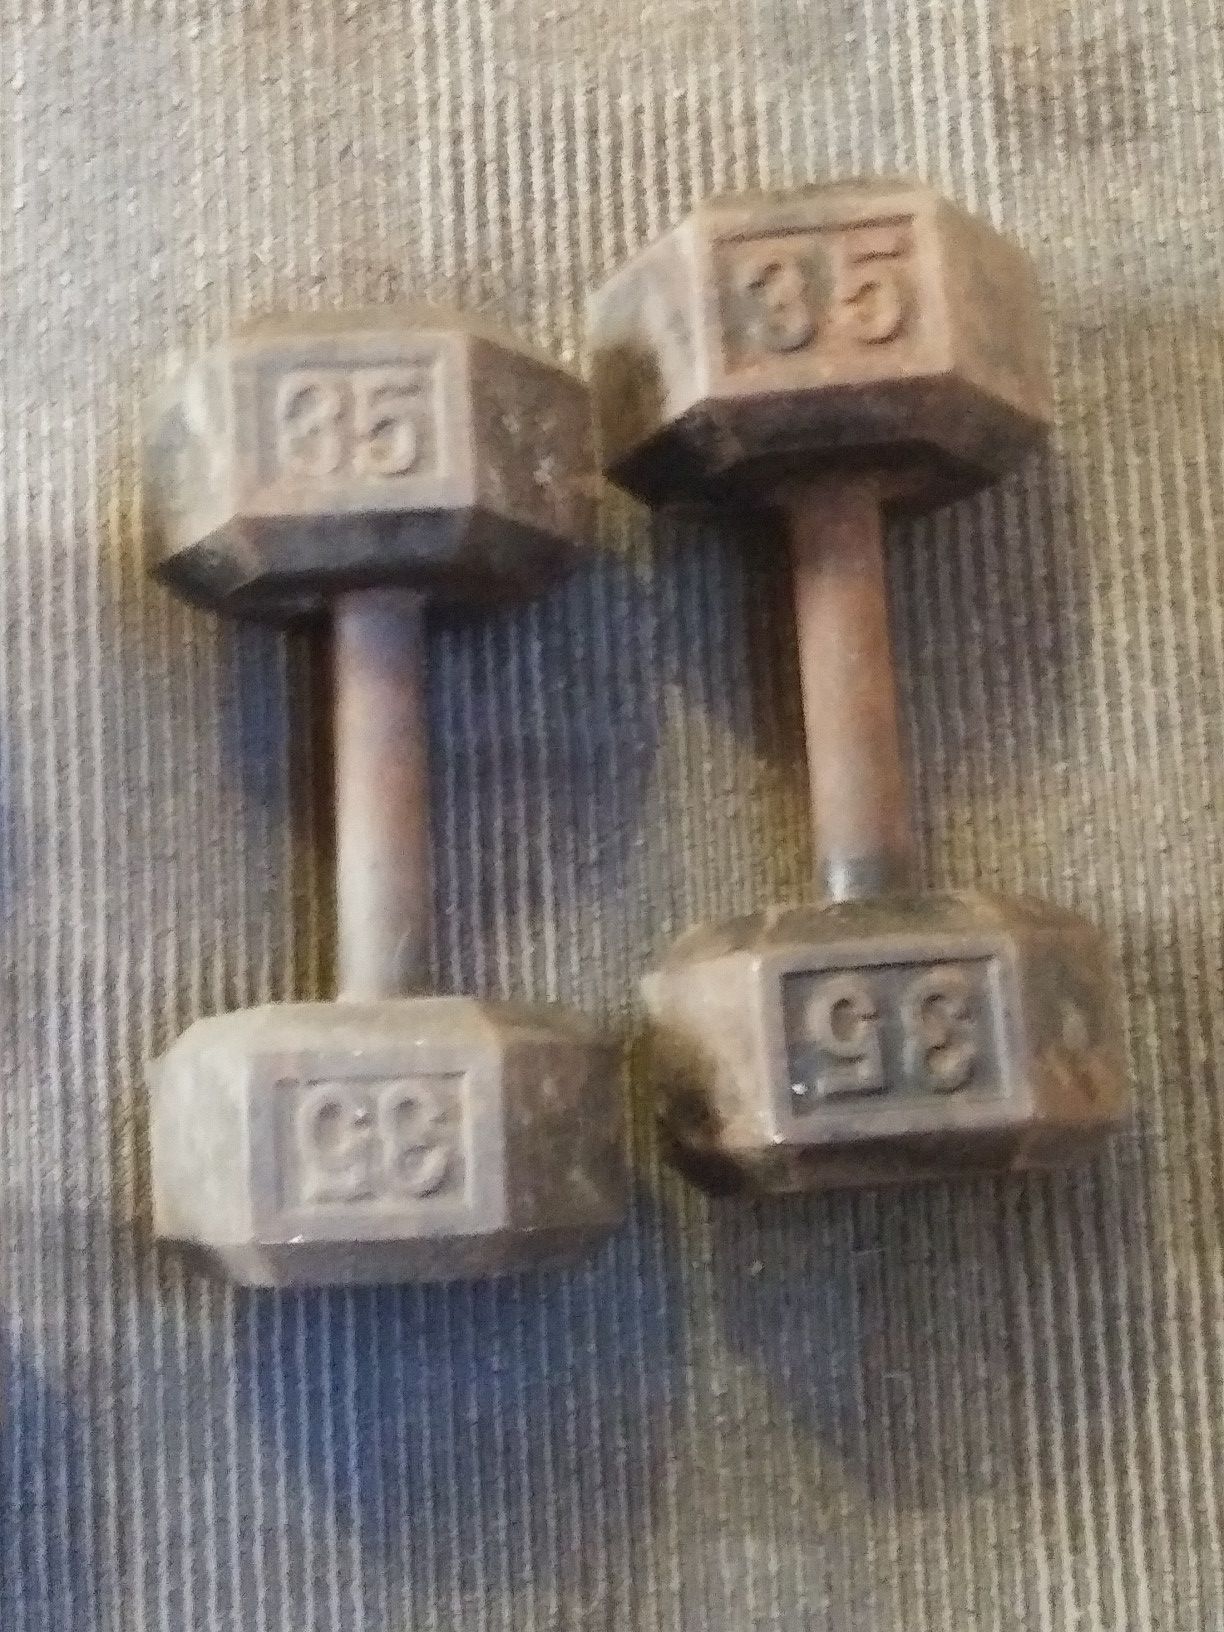 Barbell Cast Iron Hex Dumbbells, Two 35 two 45 lbs. Best offer please.